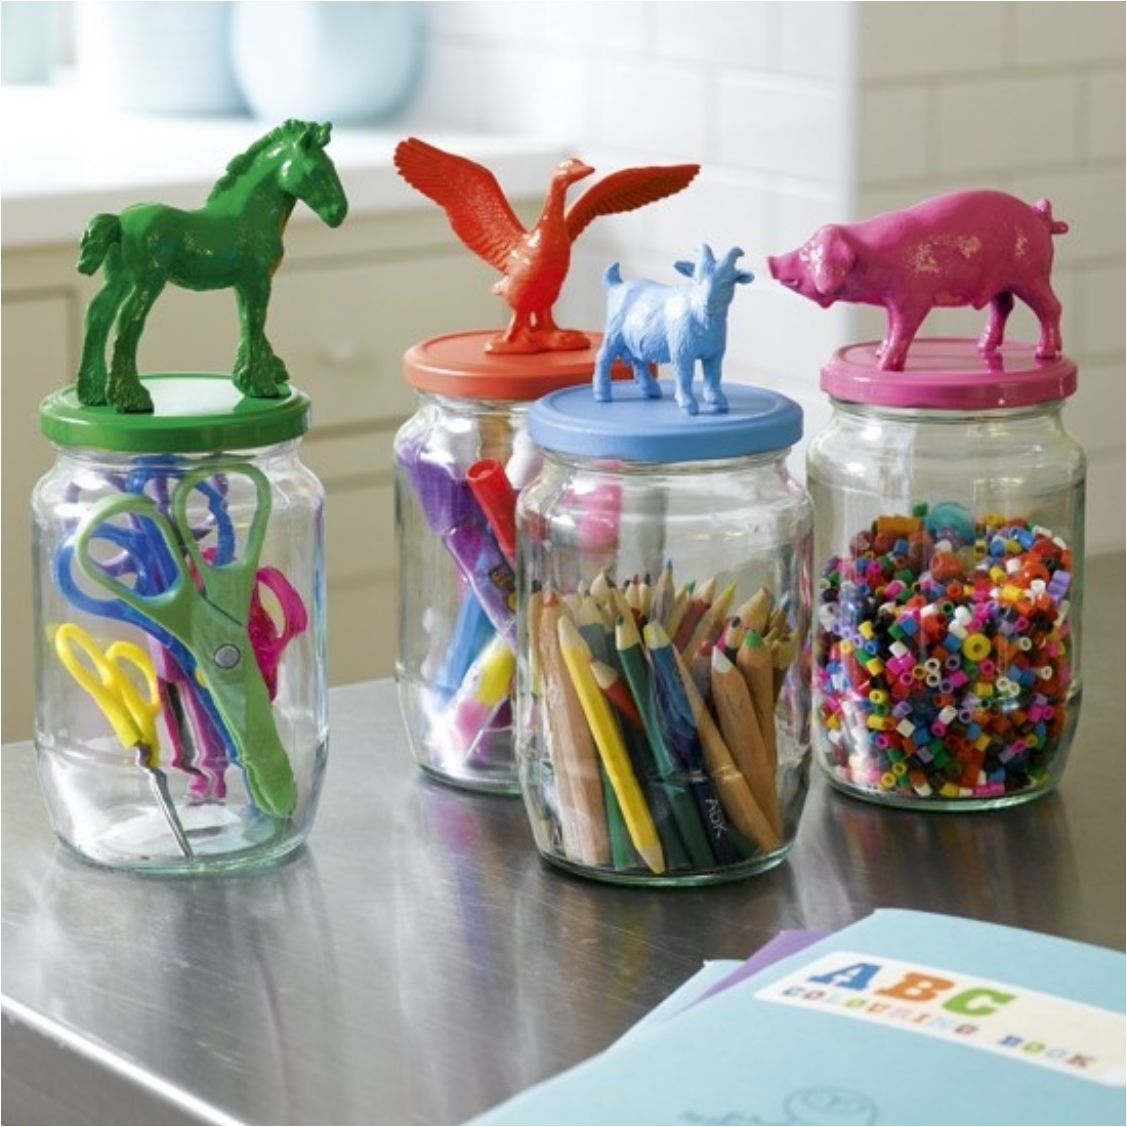 32 Toy Organizing Ideas and DIY's Every Parent Needs